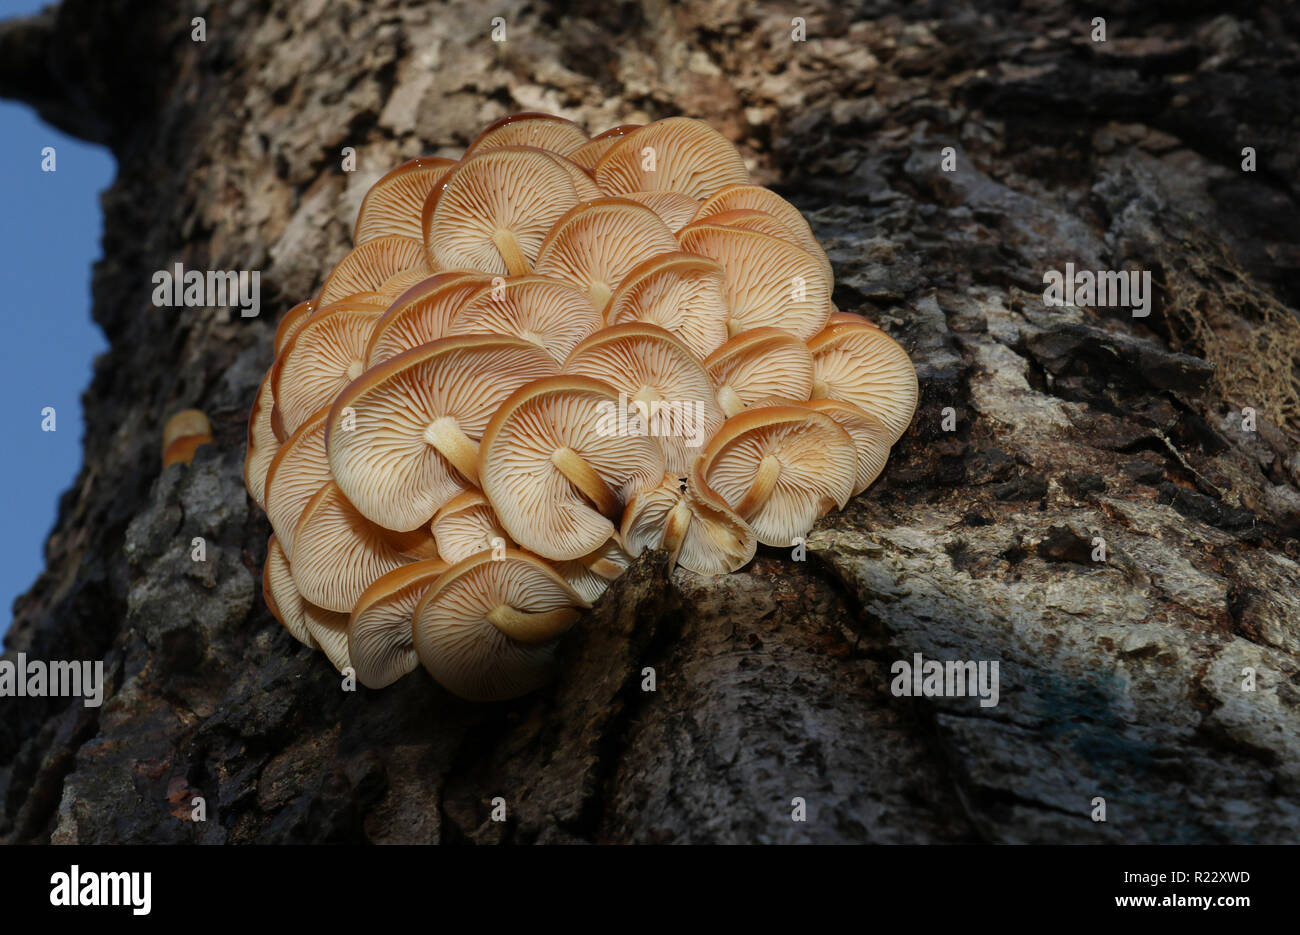 A beautiful cluster of Velvet-shank mushroom (Flammulina velutipes)  growing from a decaying horse chestnut tree trunk in woodland in the UK. Stock Photo